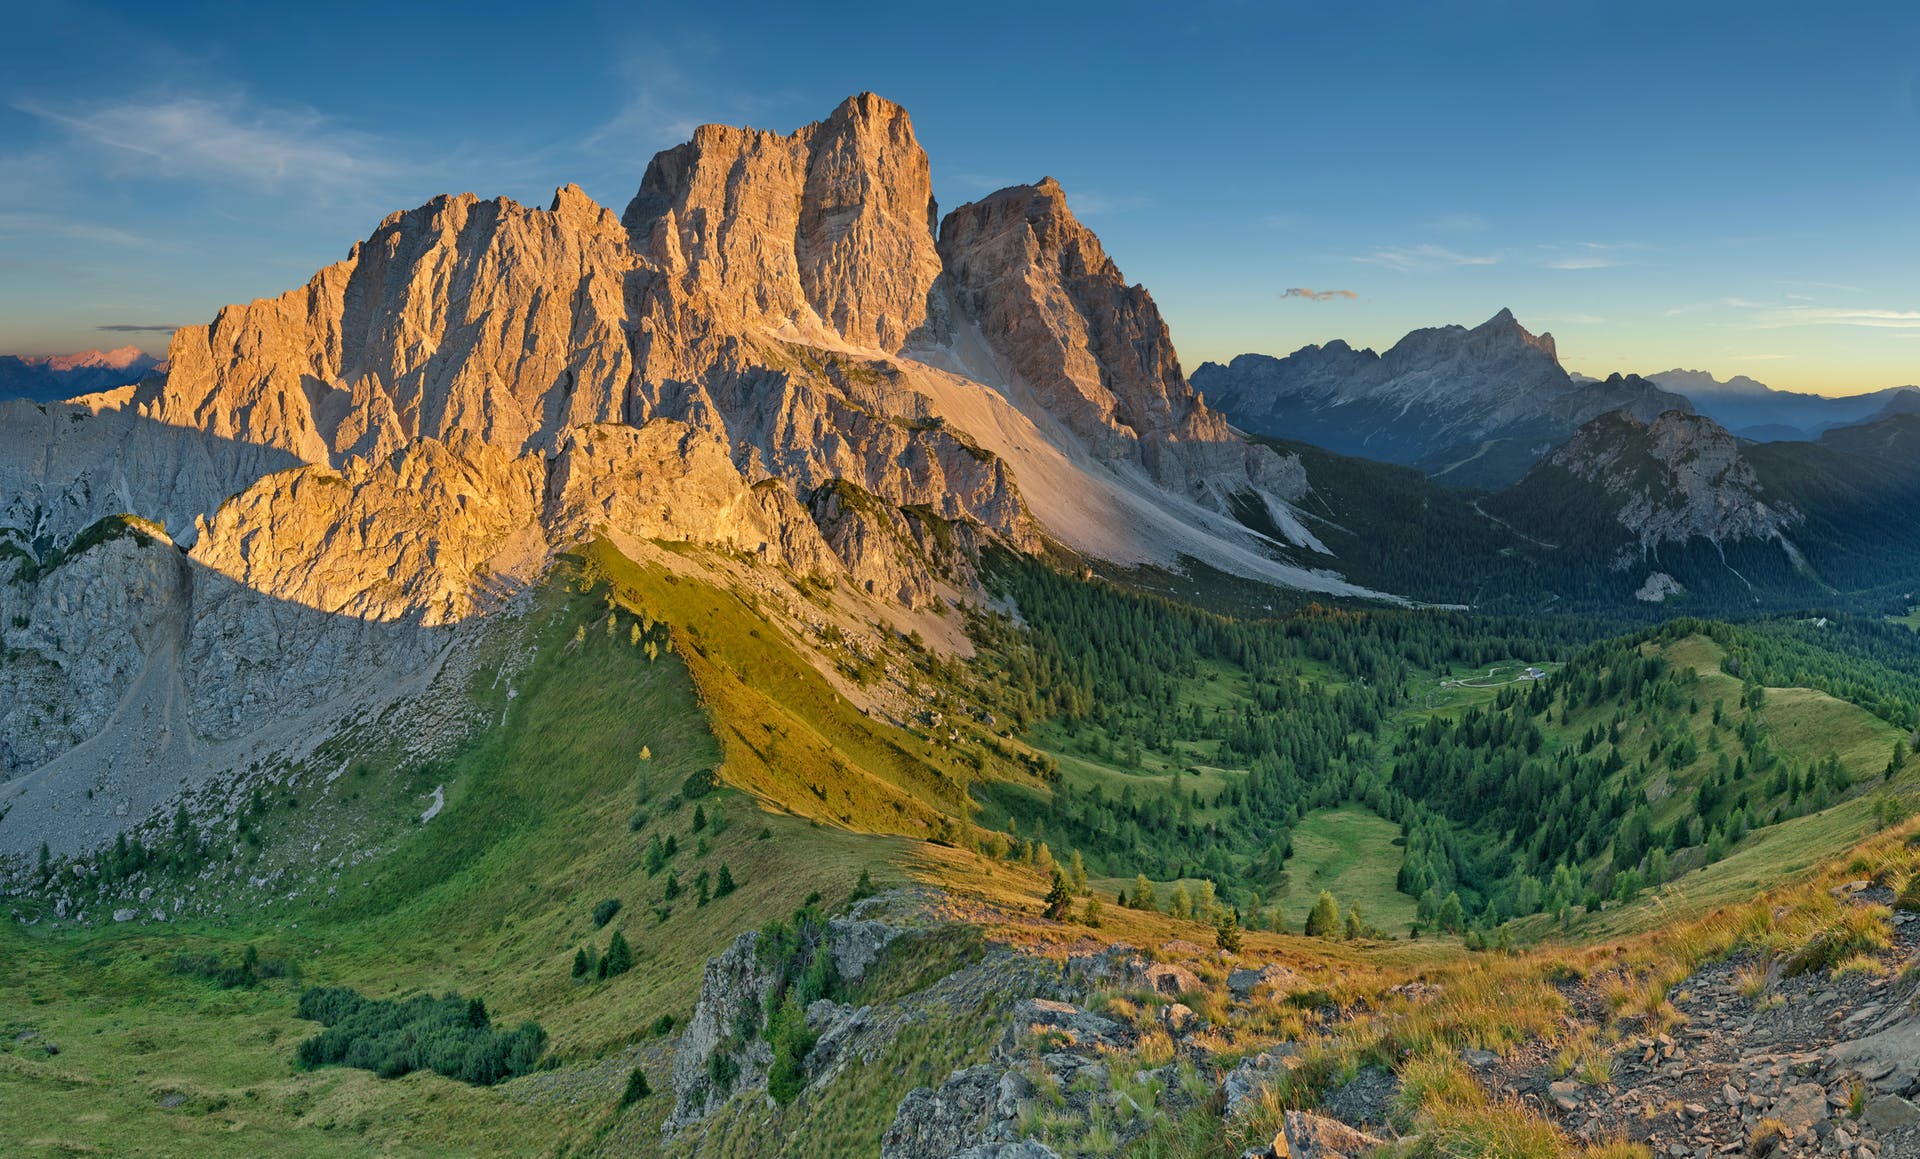 Early morning sunshine on the peaks of the Dolomites.